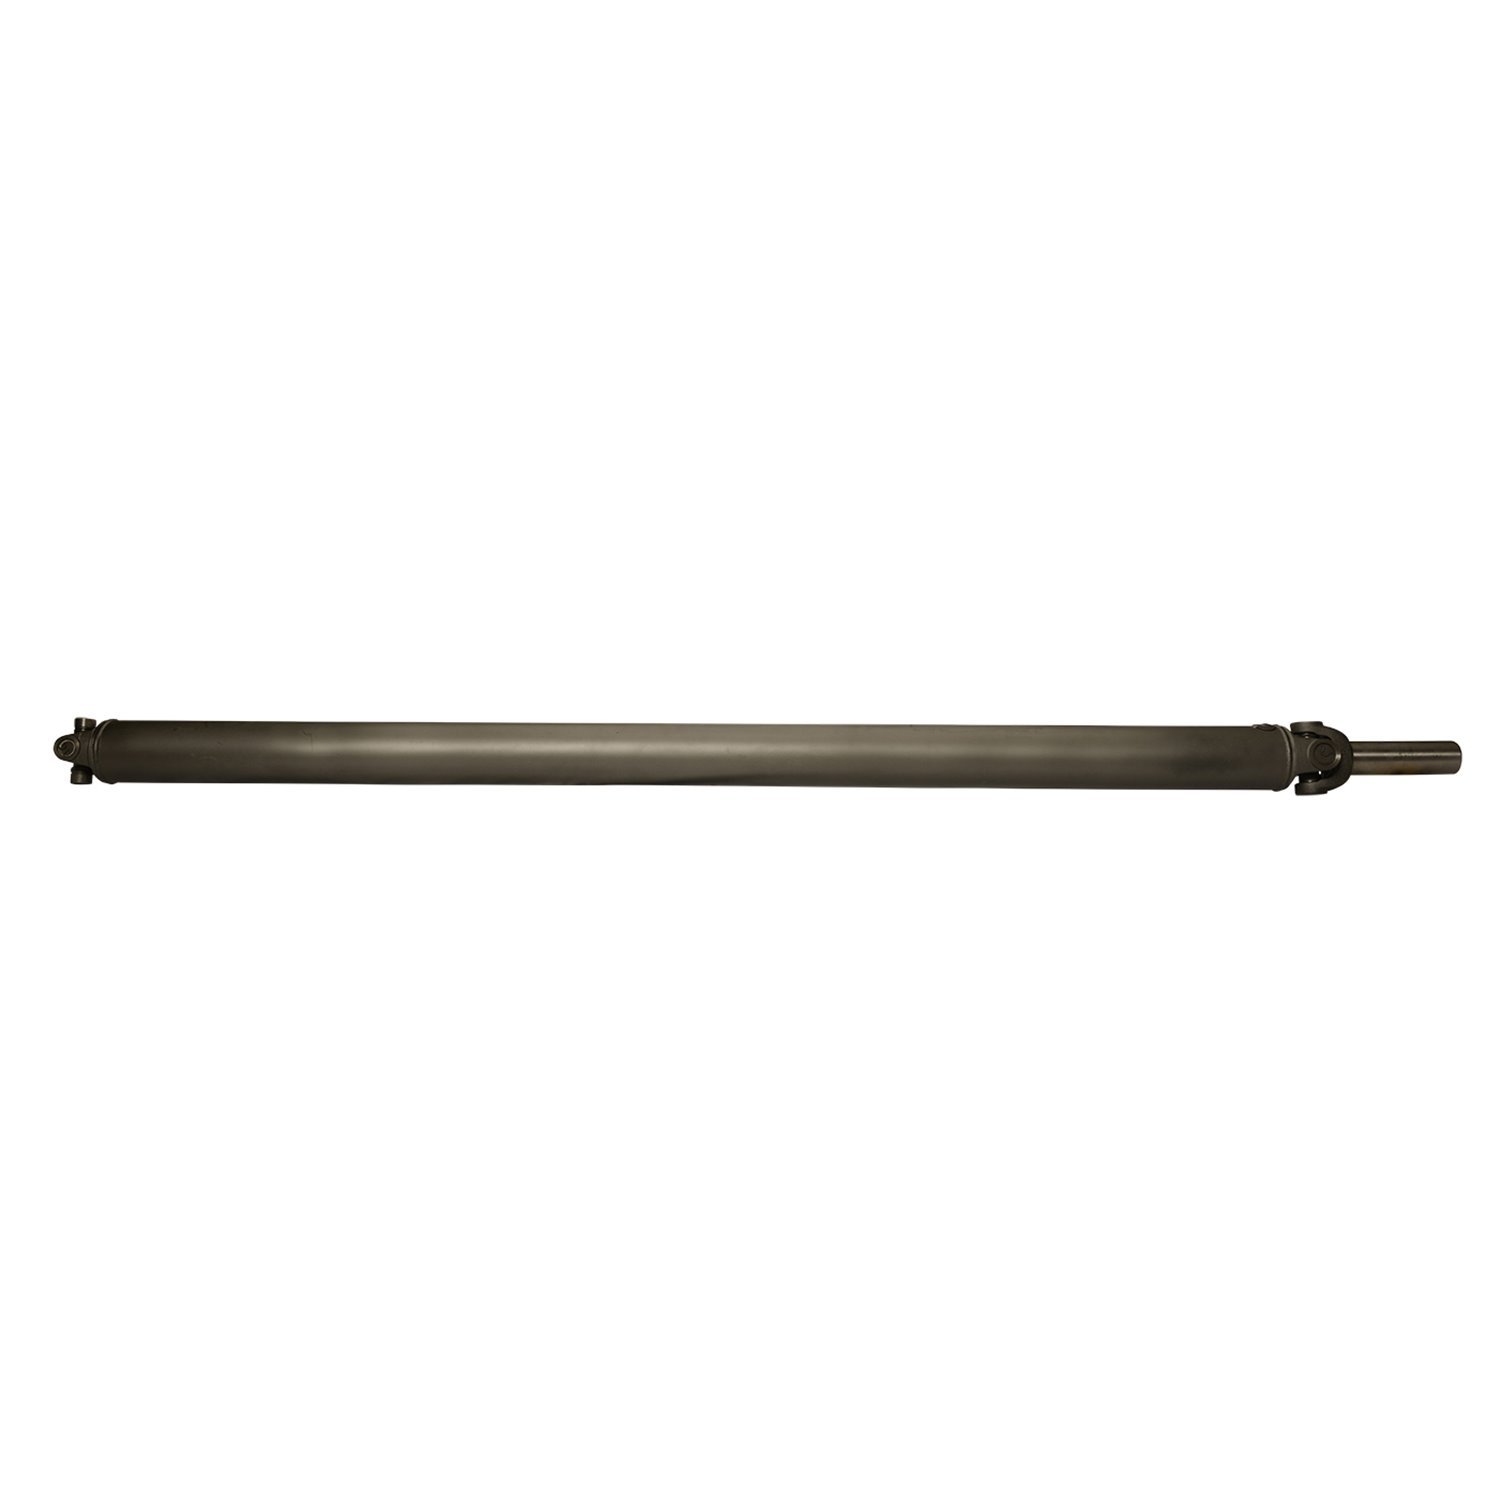 USA Standard ZDS9390 Rear Driveshaft, For Cadillac Escalade, 40-1/4 in. Center-To-Center